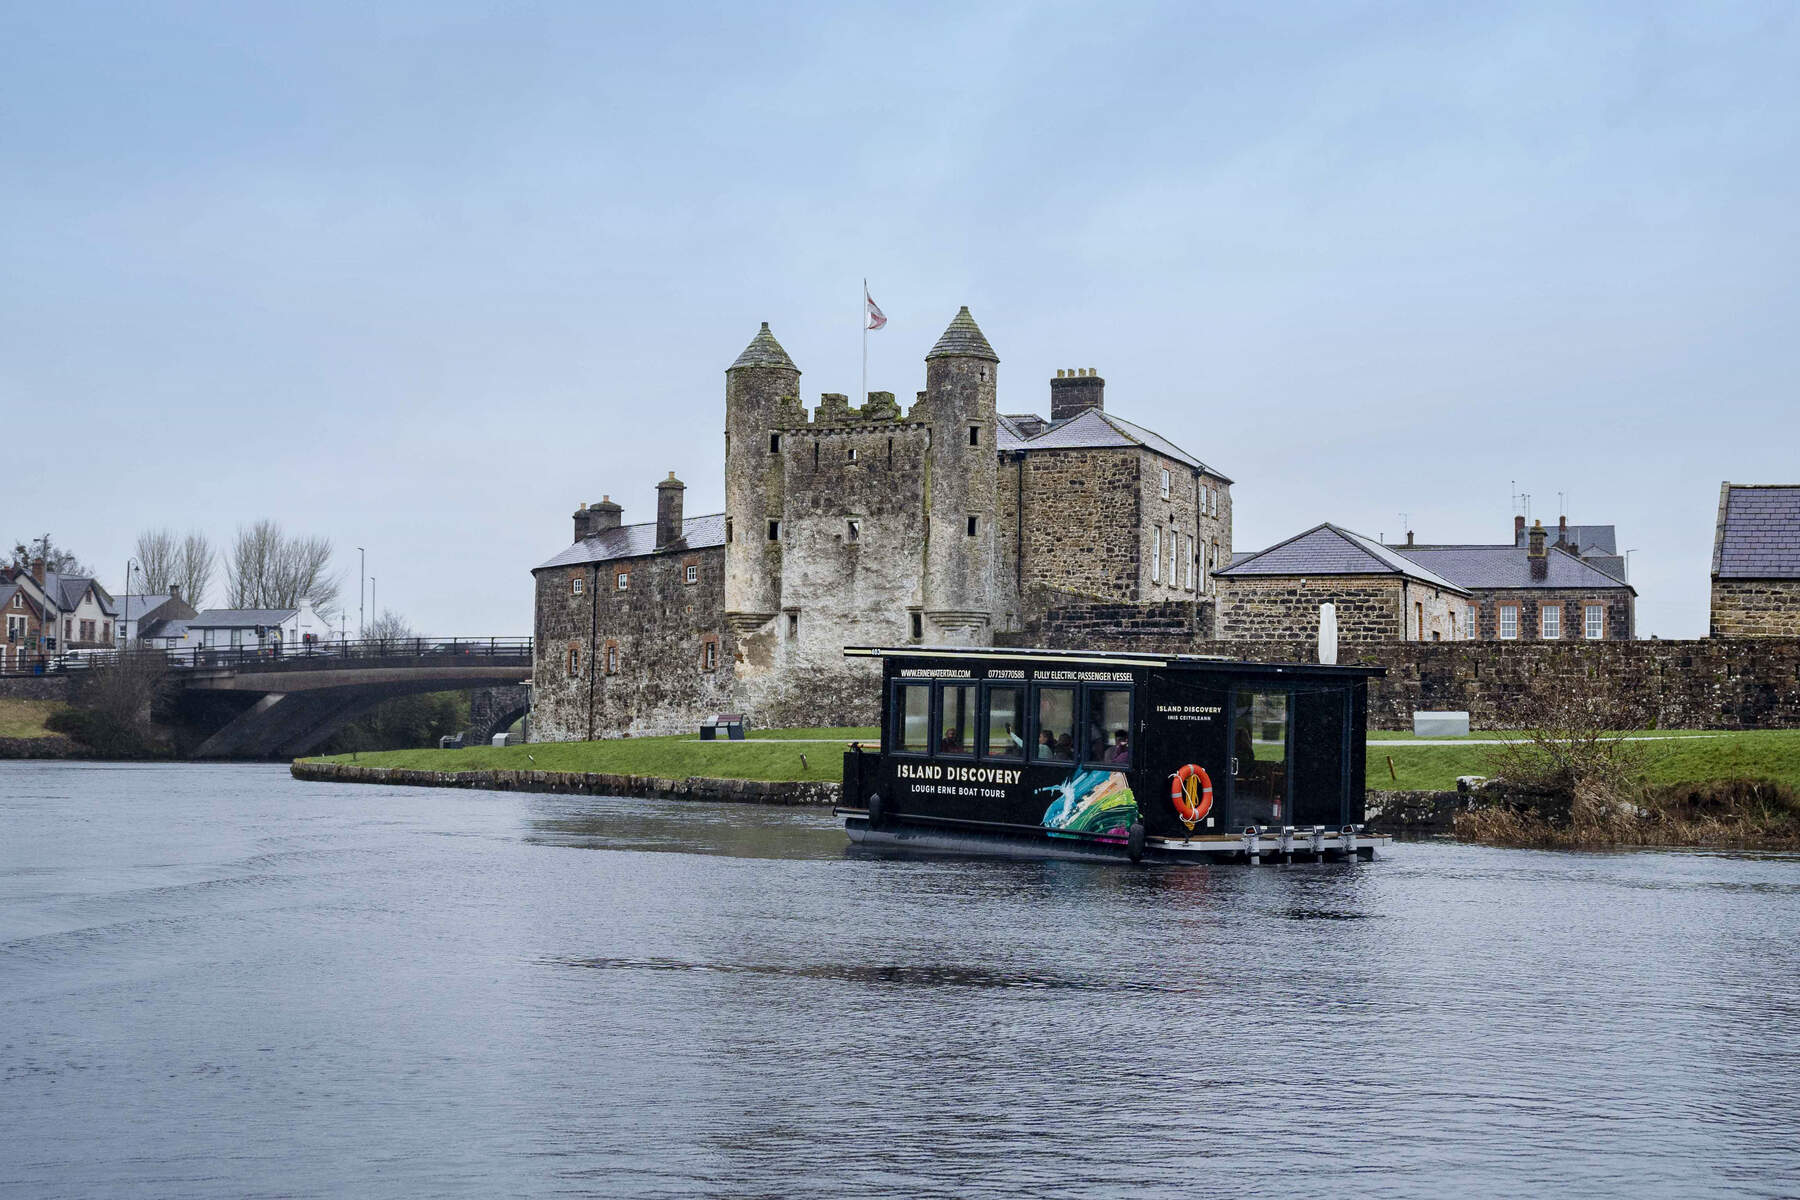 Island Discovery boat tour around Lough Erne